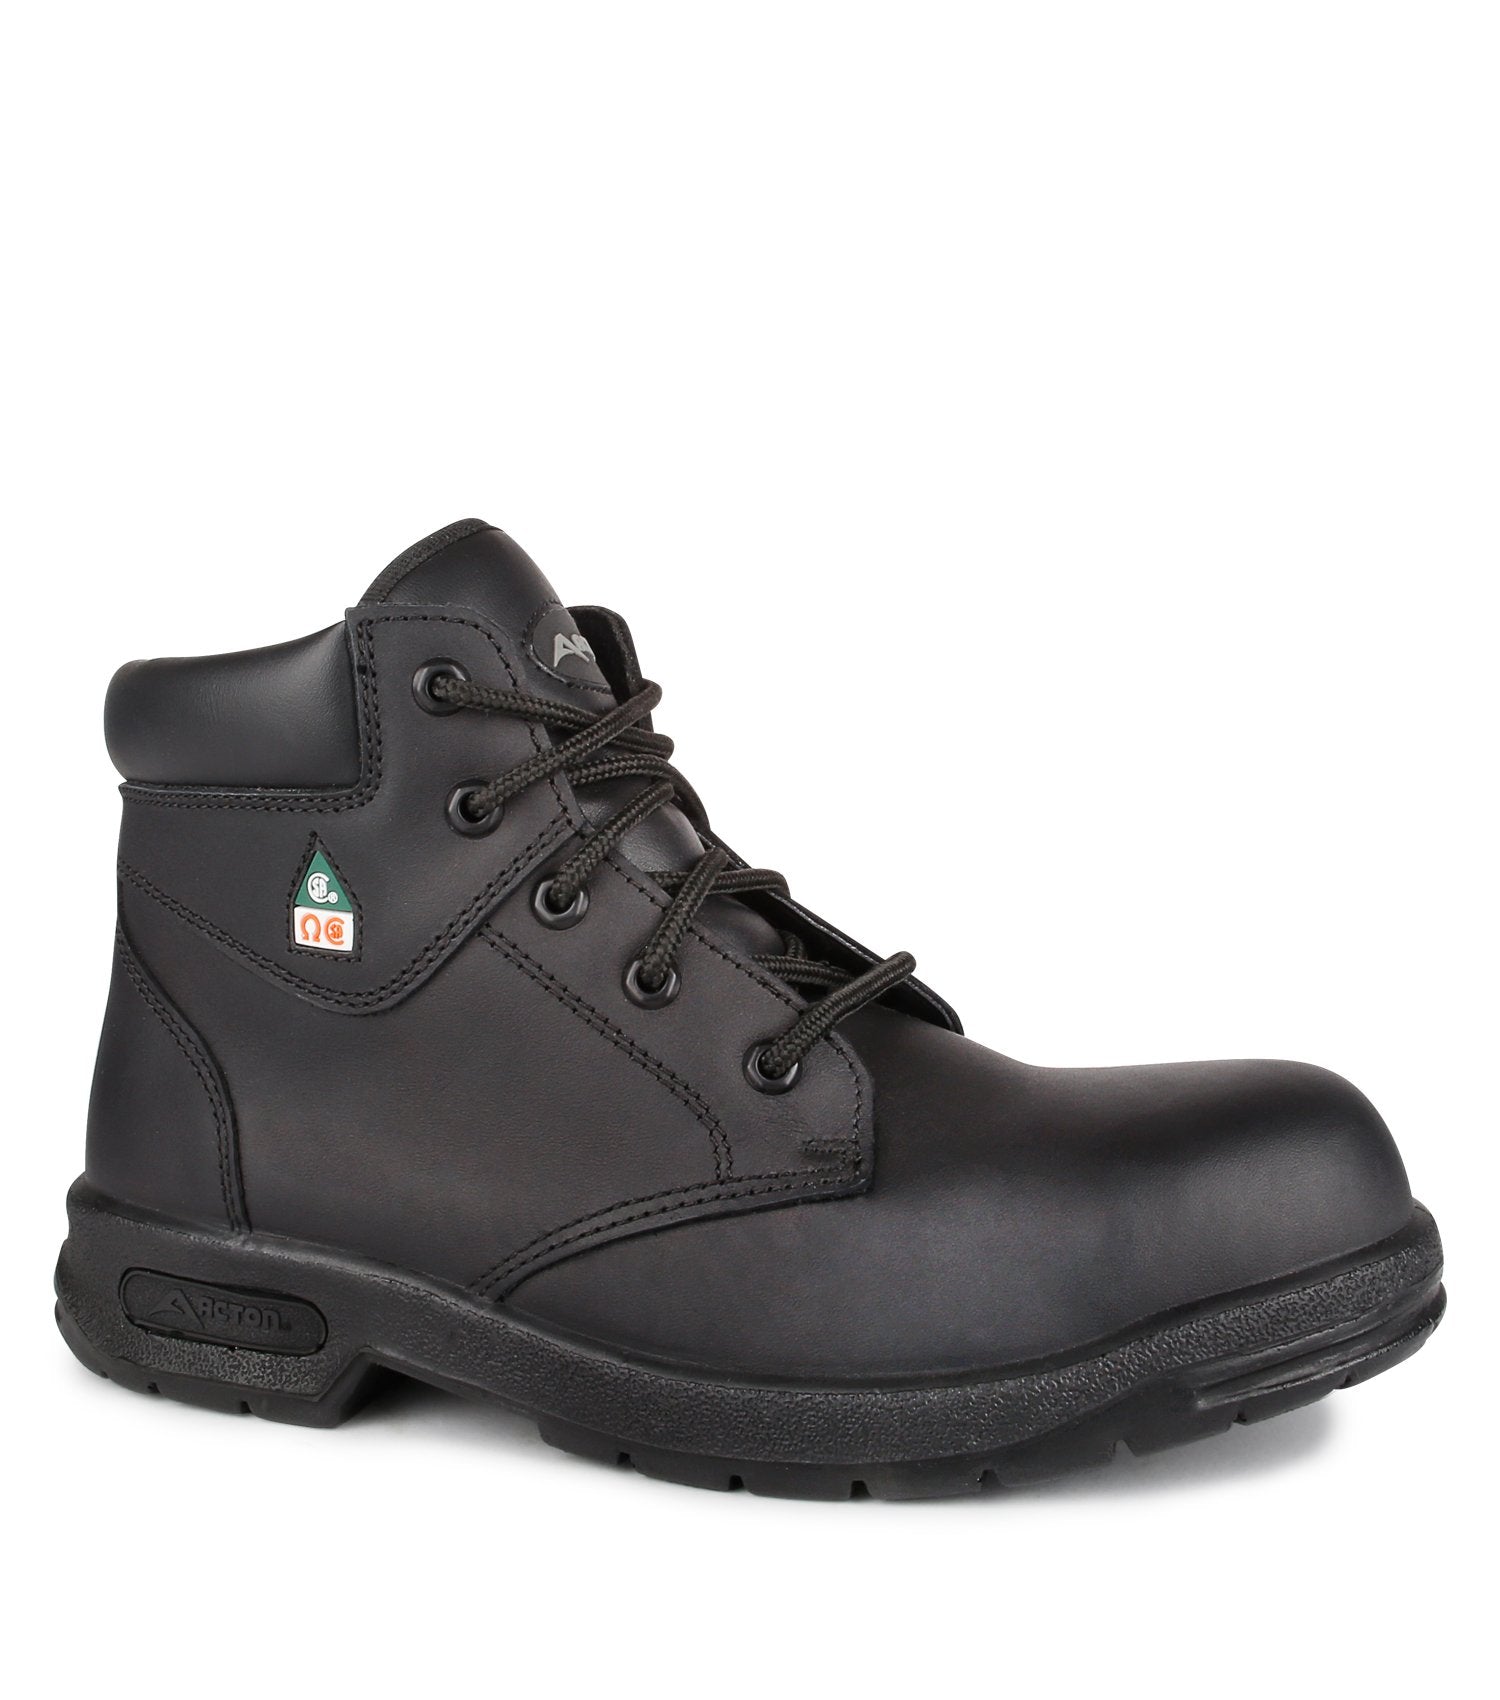 Acton ProFar 6" Men's Black Leather Steel Toe Safety Work Boots | Black | Size 6 - 13 Work Boots - Cleanflow